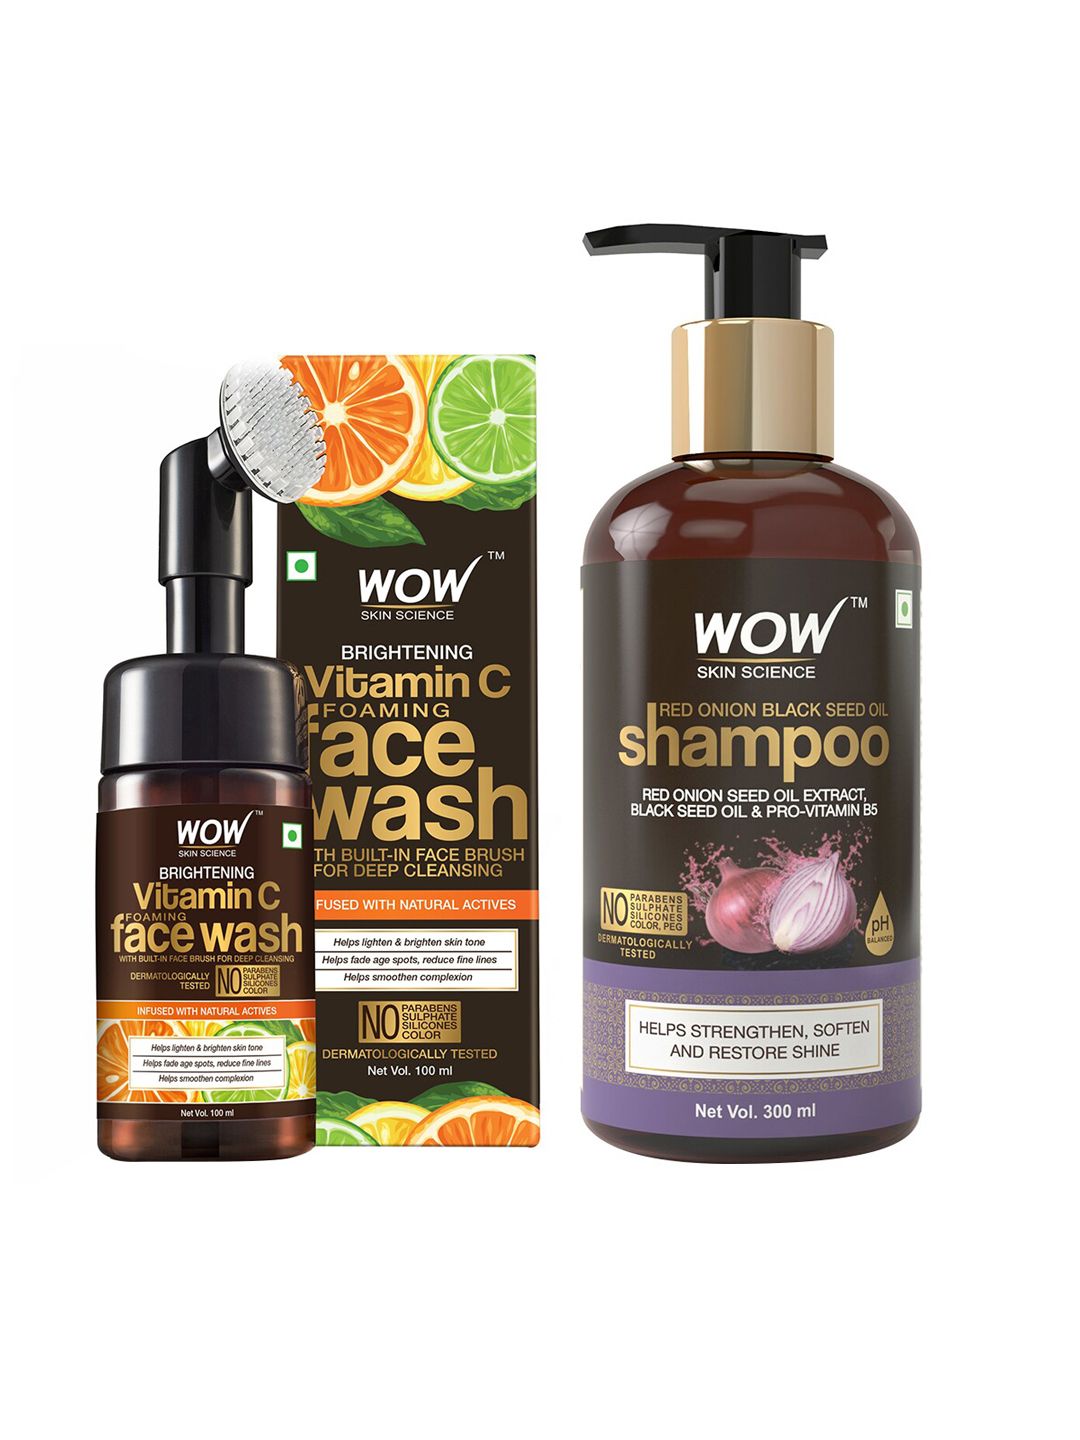 WOW SKIN SCIENCE Set of Onion Black Seed Oil Shampoo & Vitamin C Foaming Face Wash Price in India